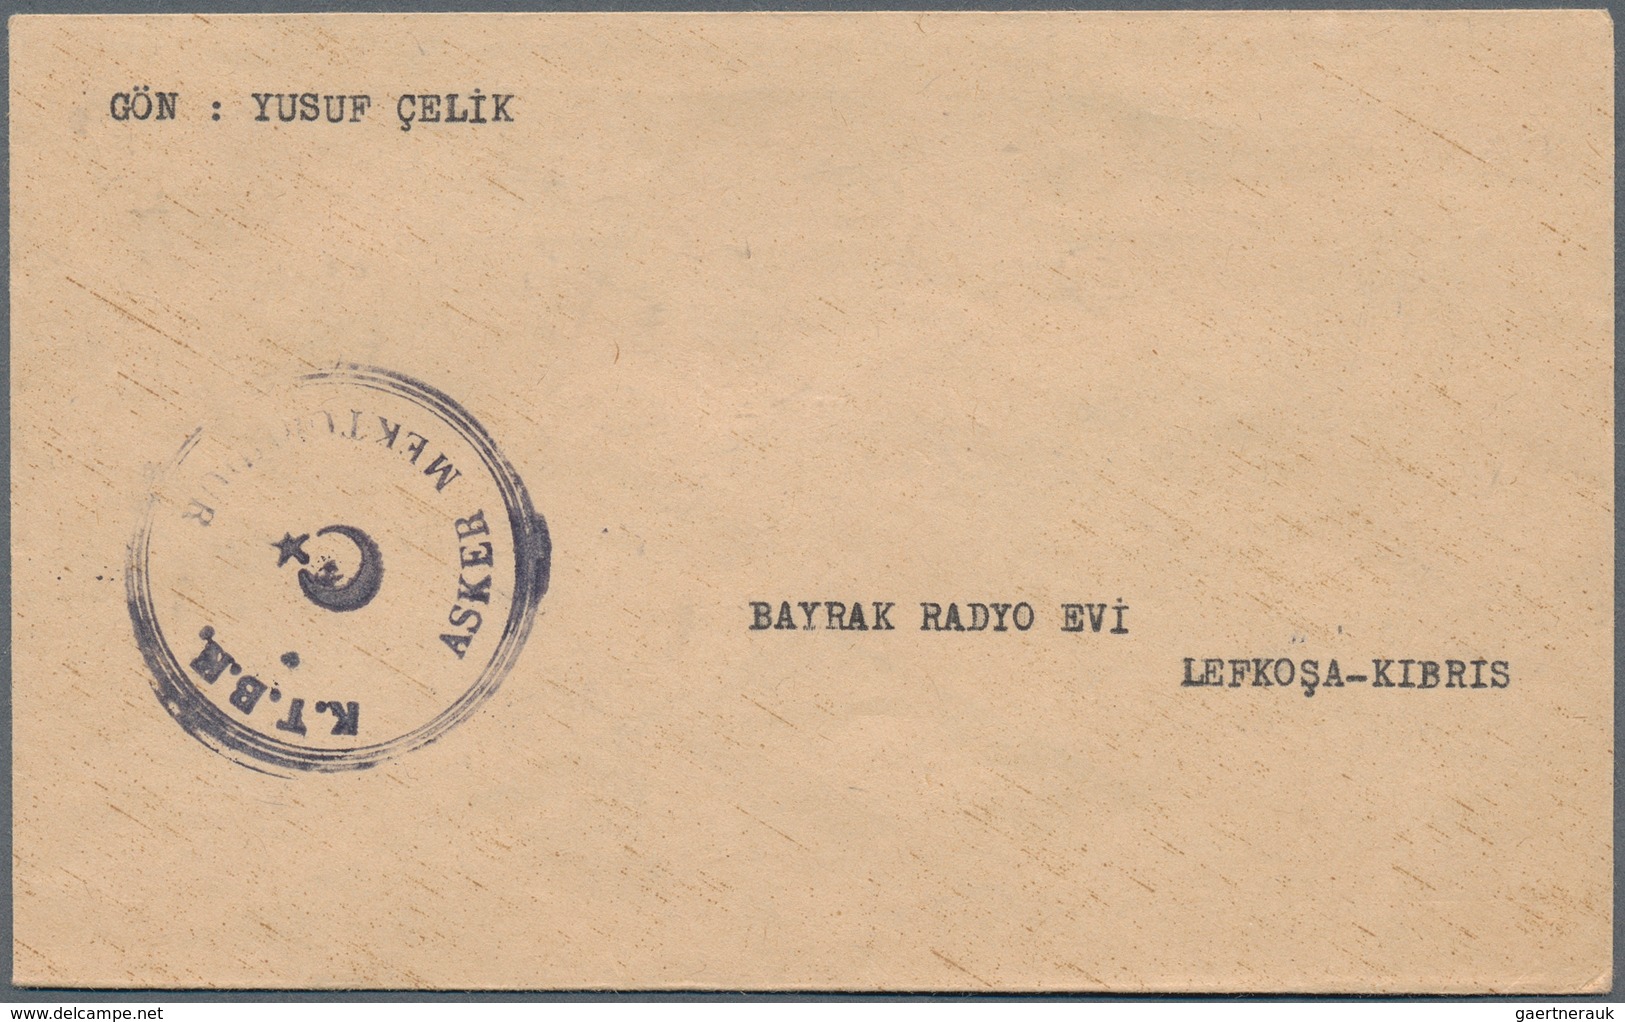 Zypern: 1957/2000 (ca.), Cyprus/Turkish Cyprus, accumulation of apprx. 330 covers/cards/ppc/f.d.c.,